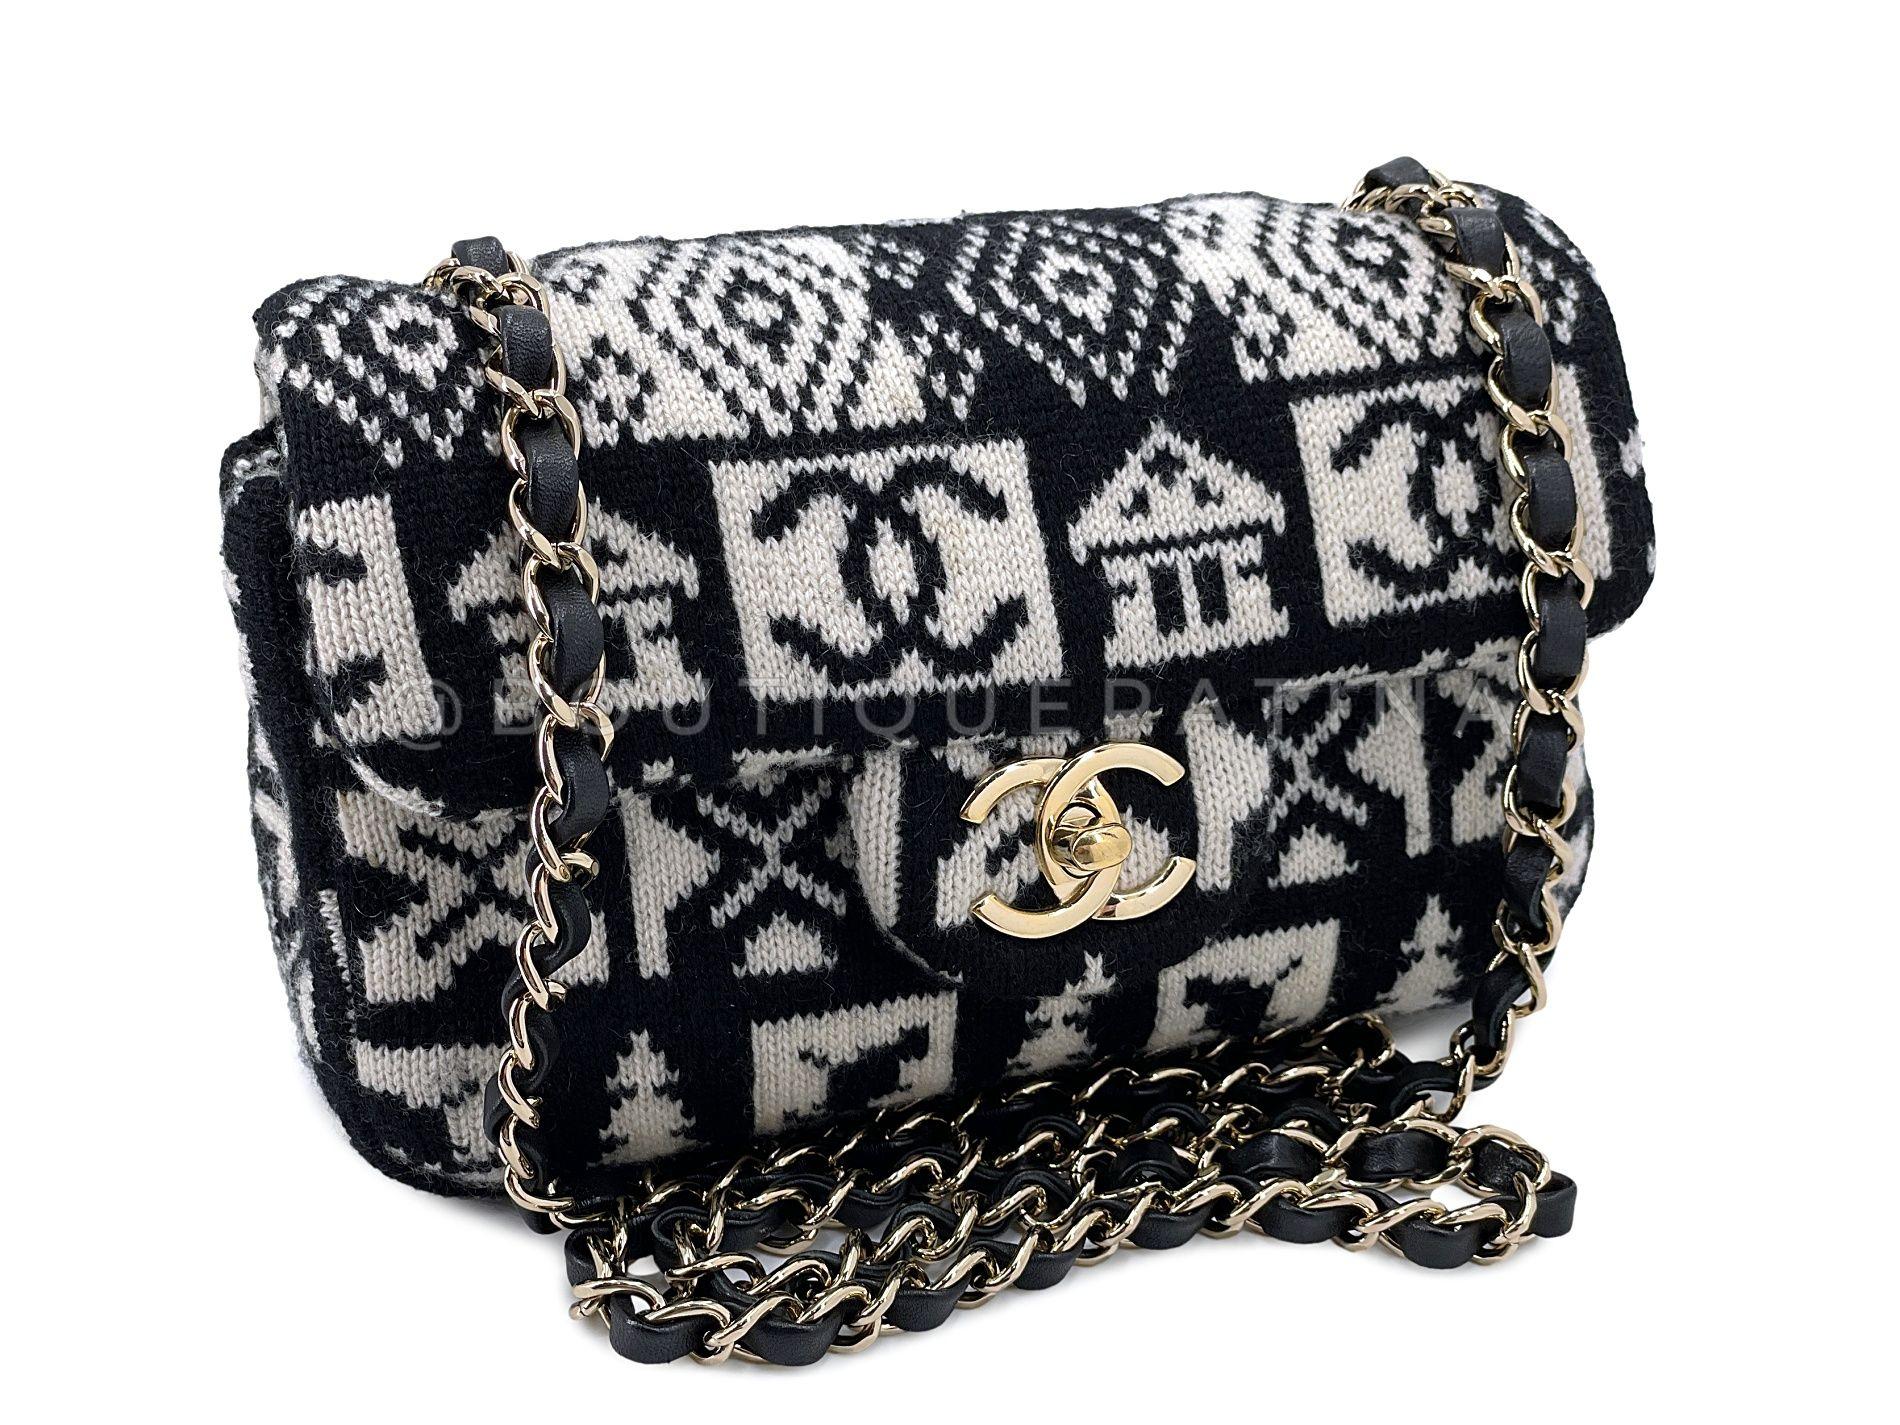 Store item: 68052
Limited edition Coco Neige edition from fall/winter 2019 is this Chanel Coco Neige Rectangular Mini Flap Bag Cashmere Knit. 

A chic cashmere knit print exterior and black interior with side zipper pocket. 

Crossbody black woven